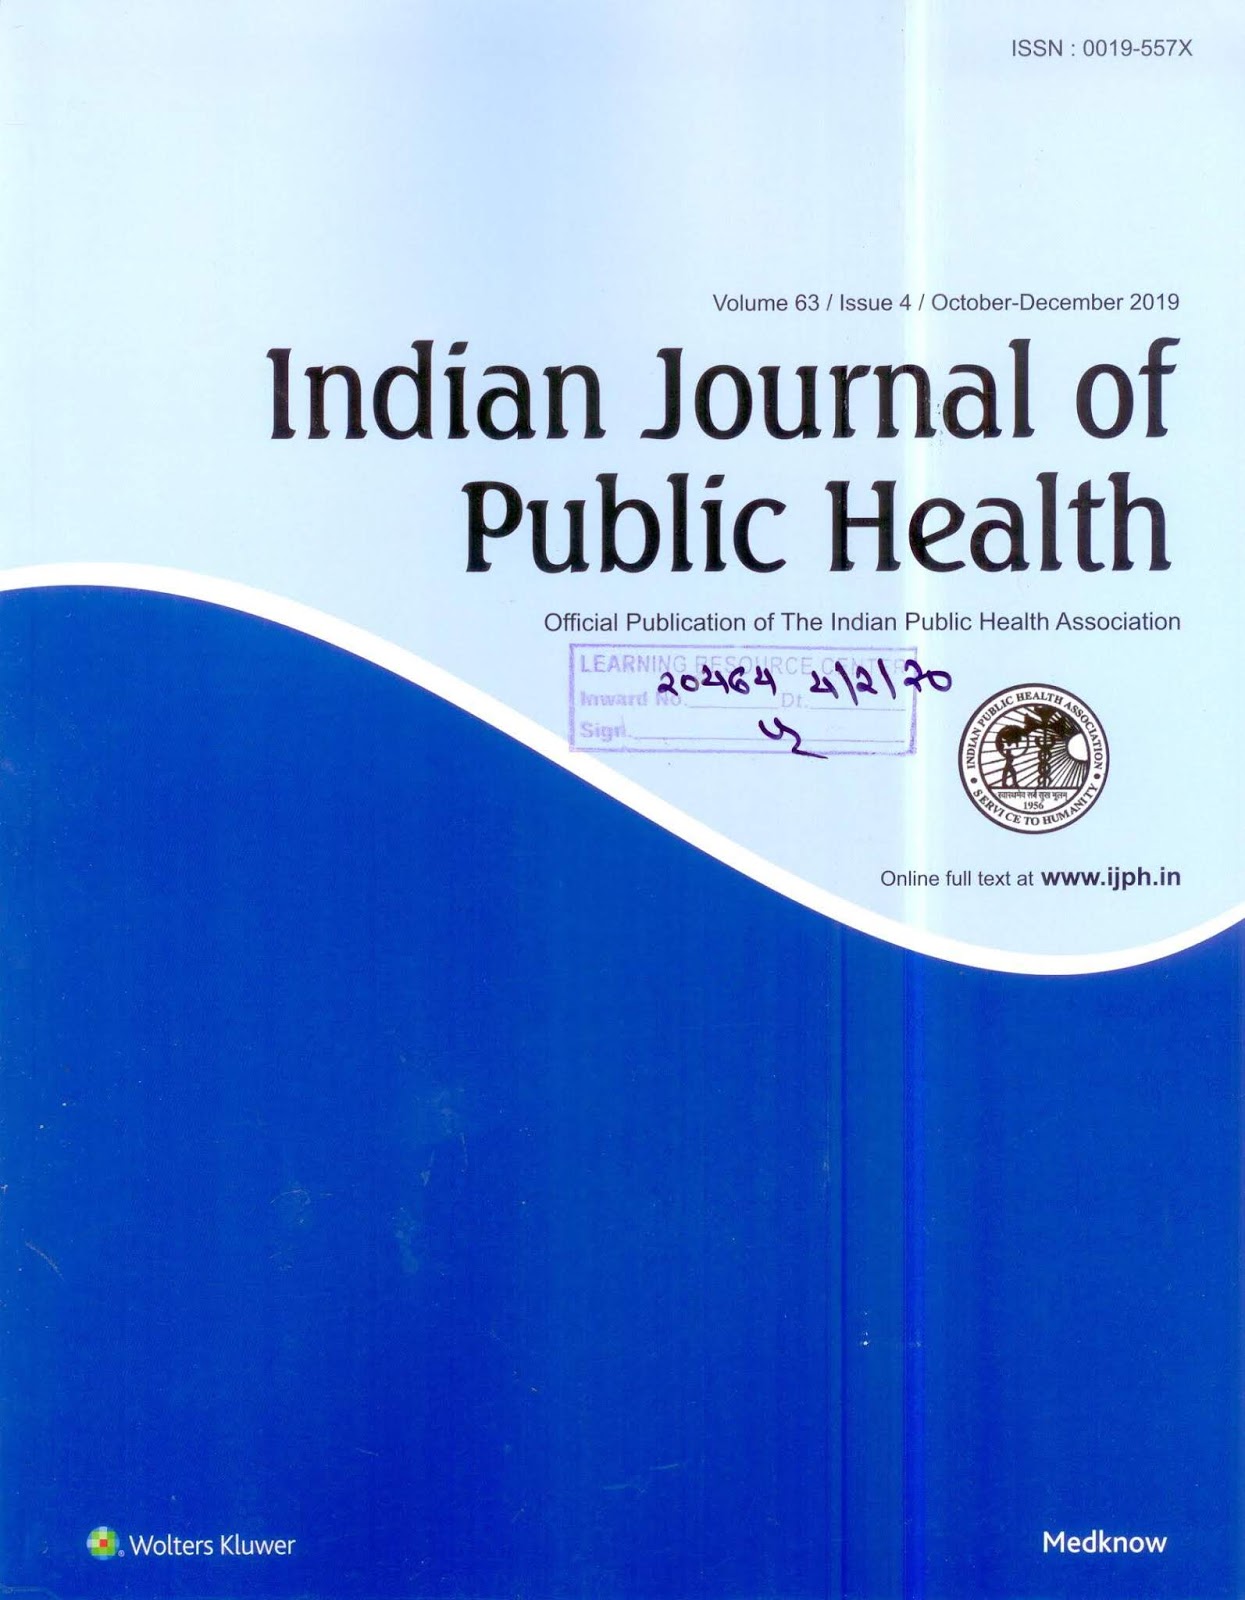 http://www.ijph.in/showBackIssue.asp?issn=0019-557X;year=2019;volume=63;issue=4;month=October-December